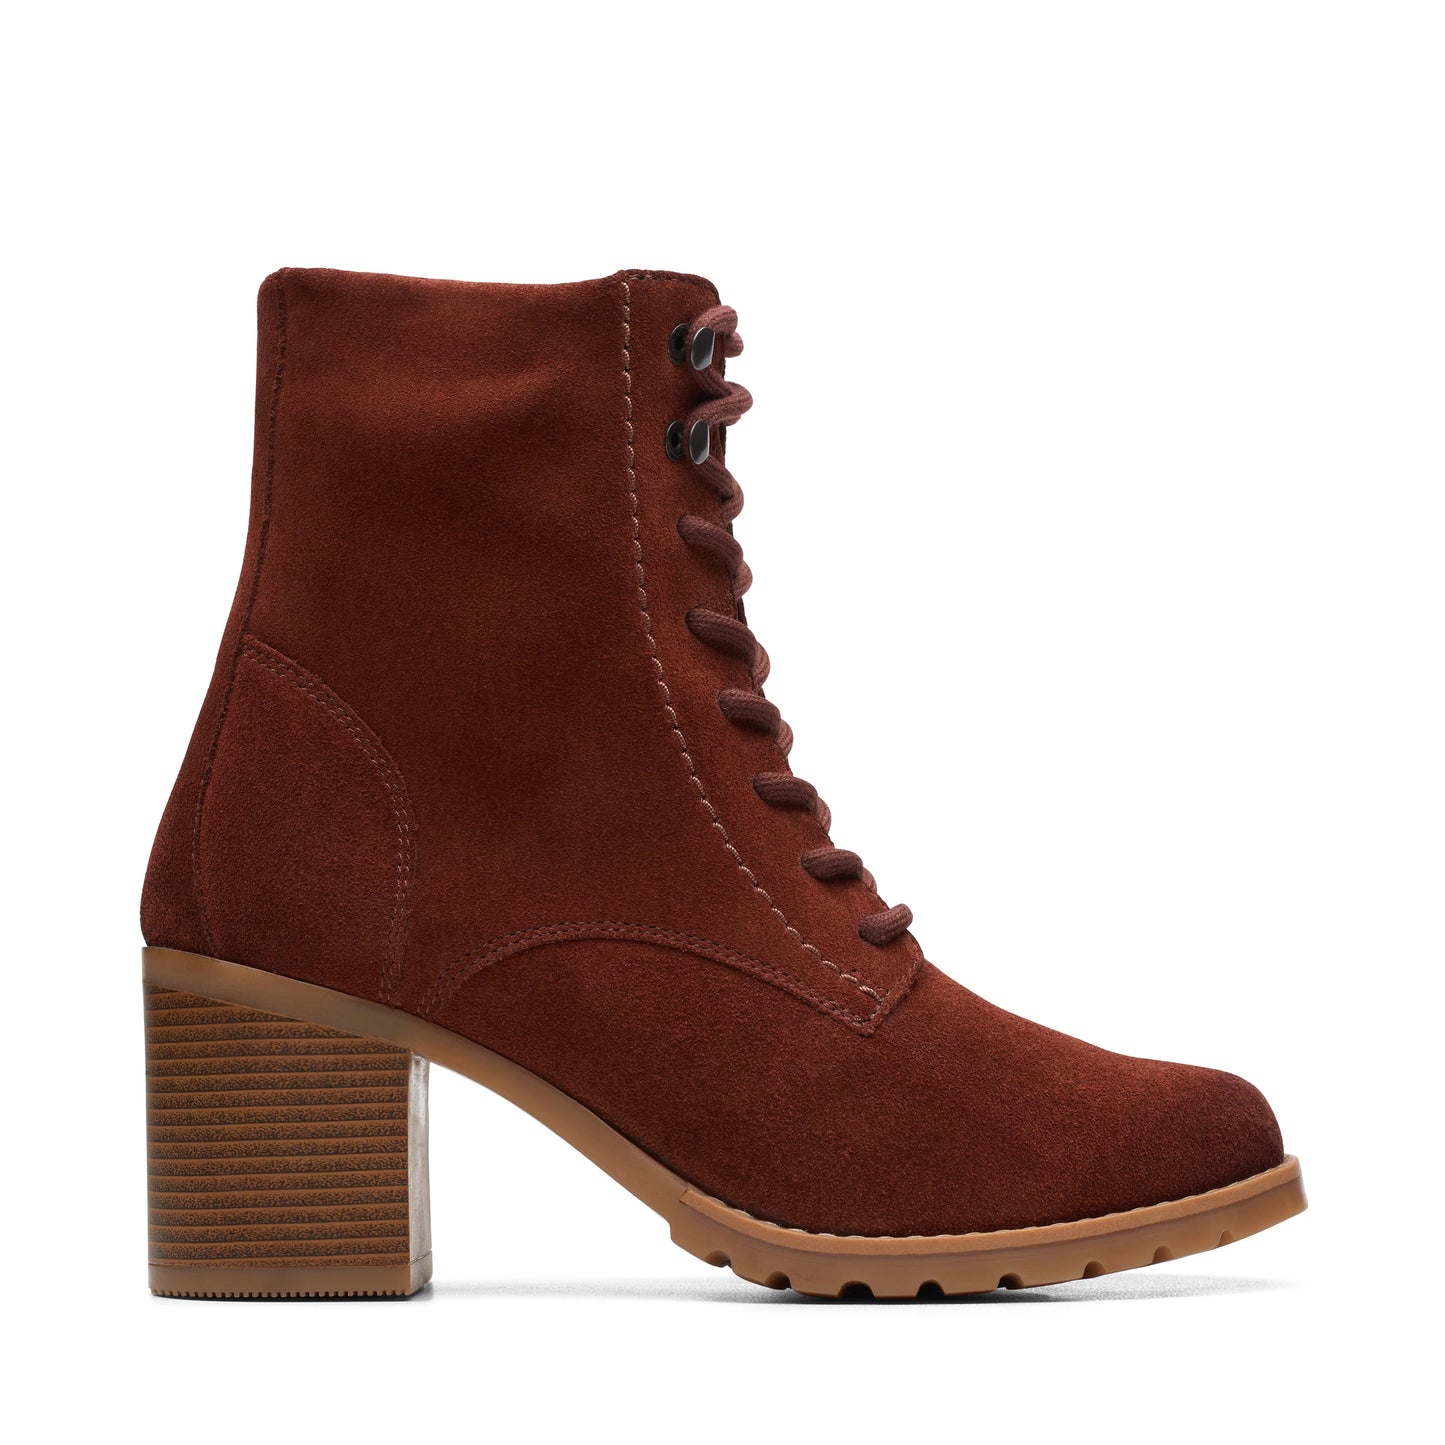 CLARKS | BOTAS MUJER | CLARKWELL LACE BRITISHTANWLINED | MARRÓN